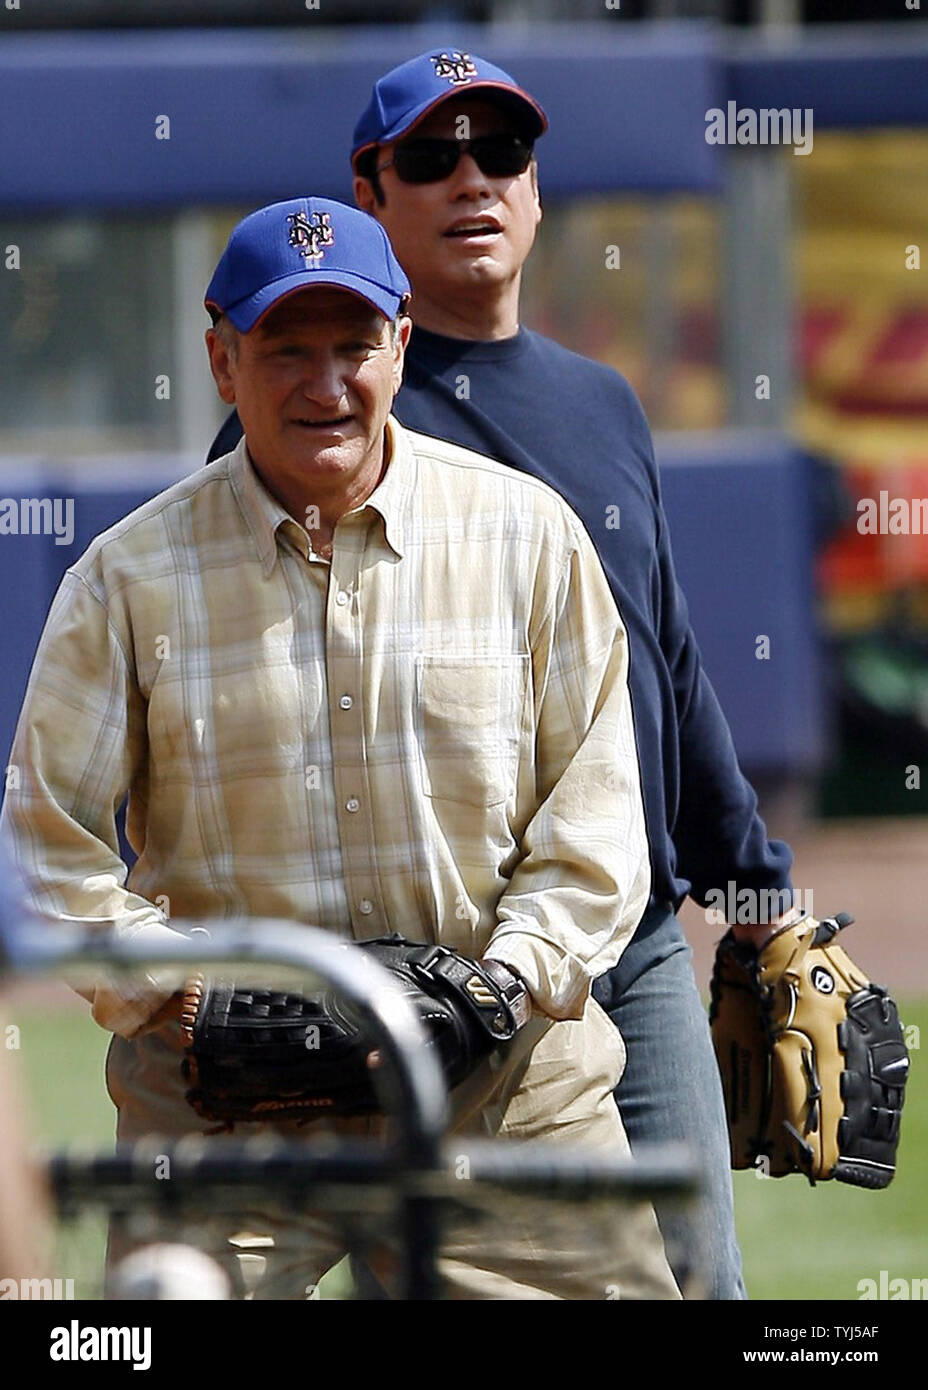 (L-R) Robin Williams and John Travolta play the infield while shooting the movie 'Old Dogs' at Shea Stadium in New York City on July 26, 2007.  (UPI Photo/John Angelillo) Stock Photo